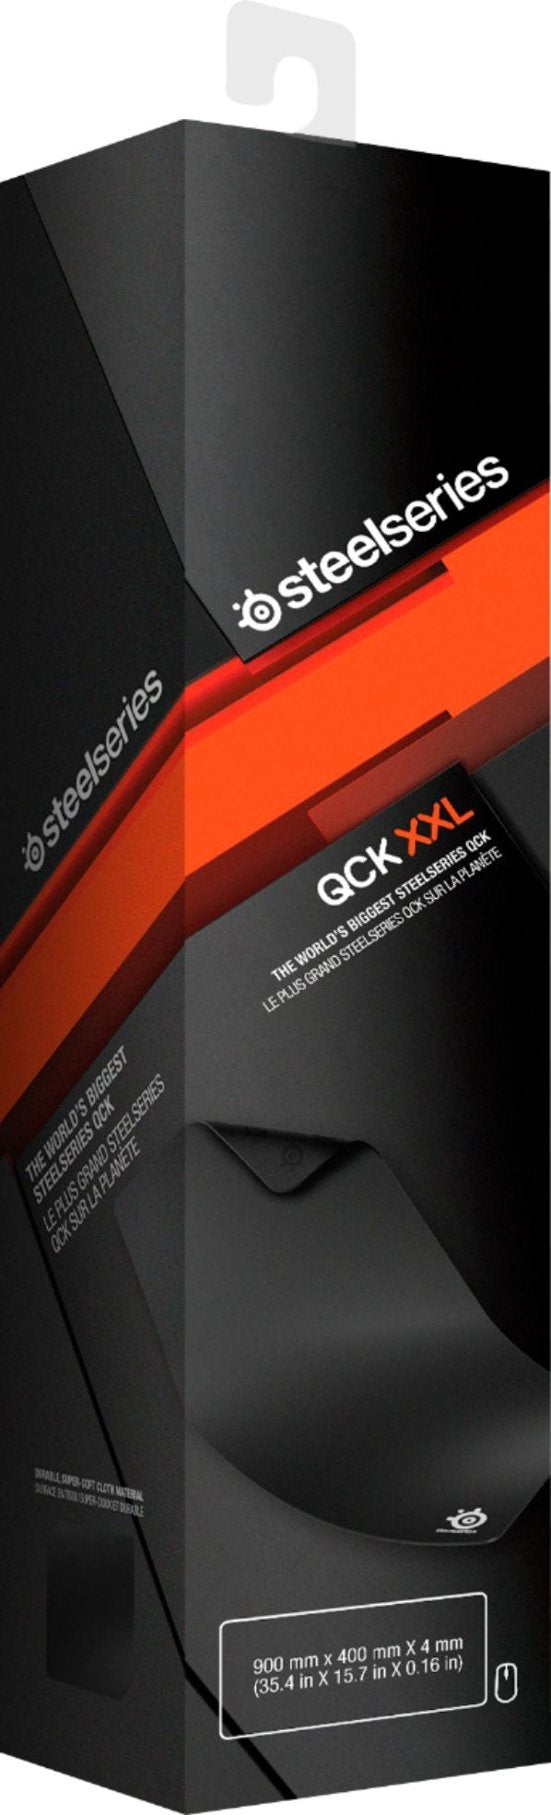 SteelSeries QcK Cloth Gaming Mouse Pad (XXL)